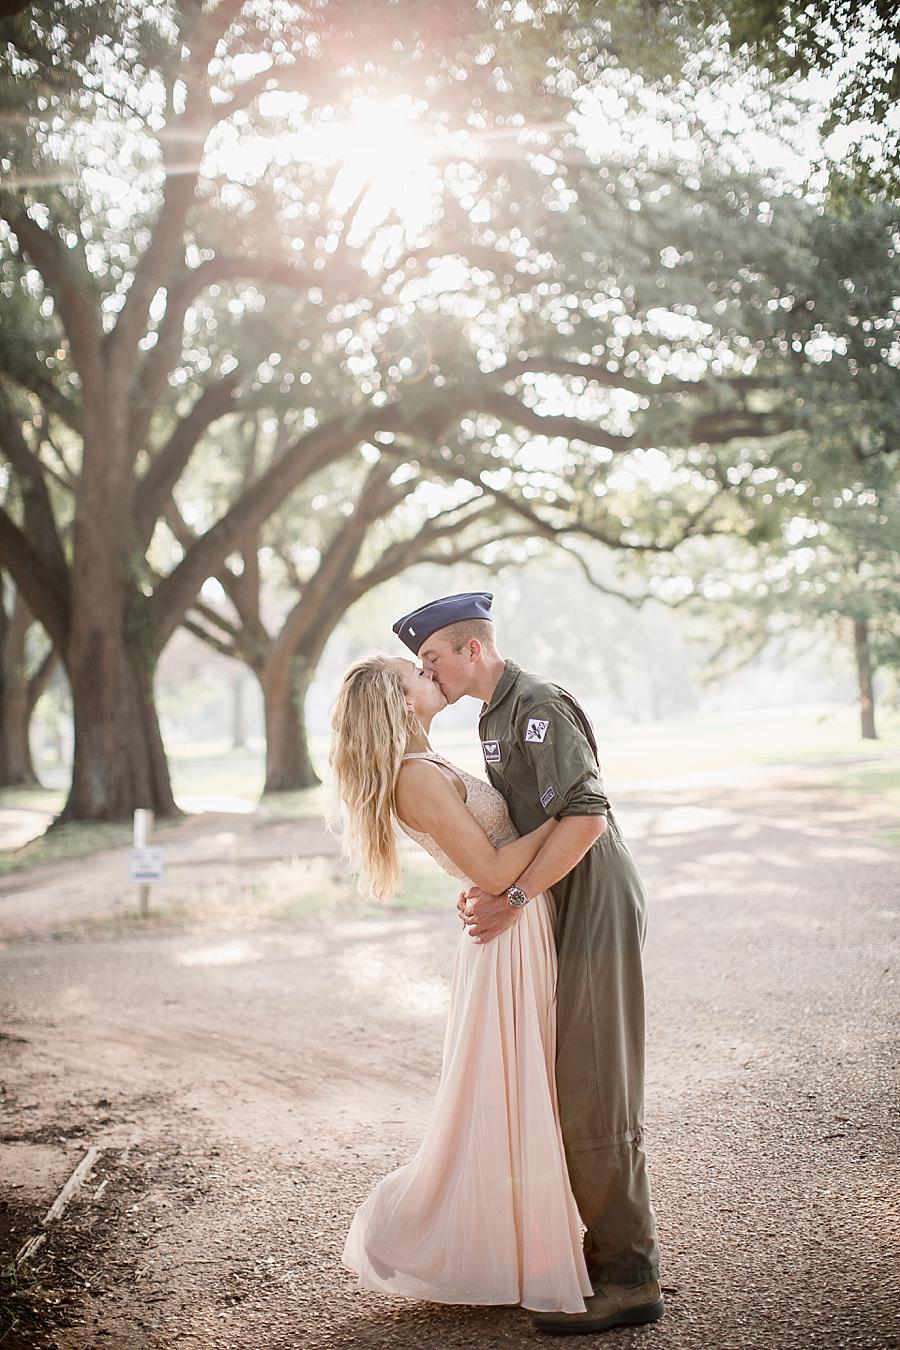 Gravel path at this Air Force Engagement Session by Knoxville Wedding Photographer, Amanda May Photos.